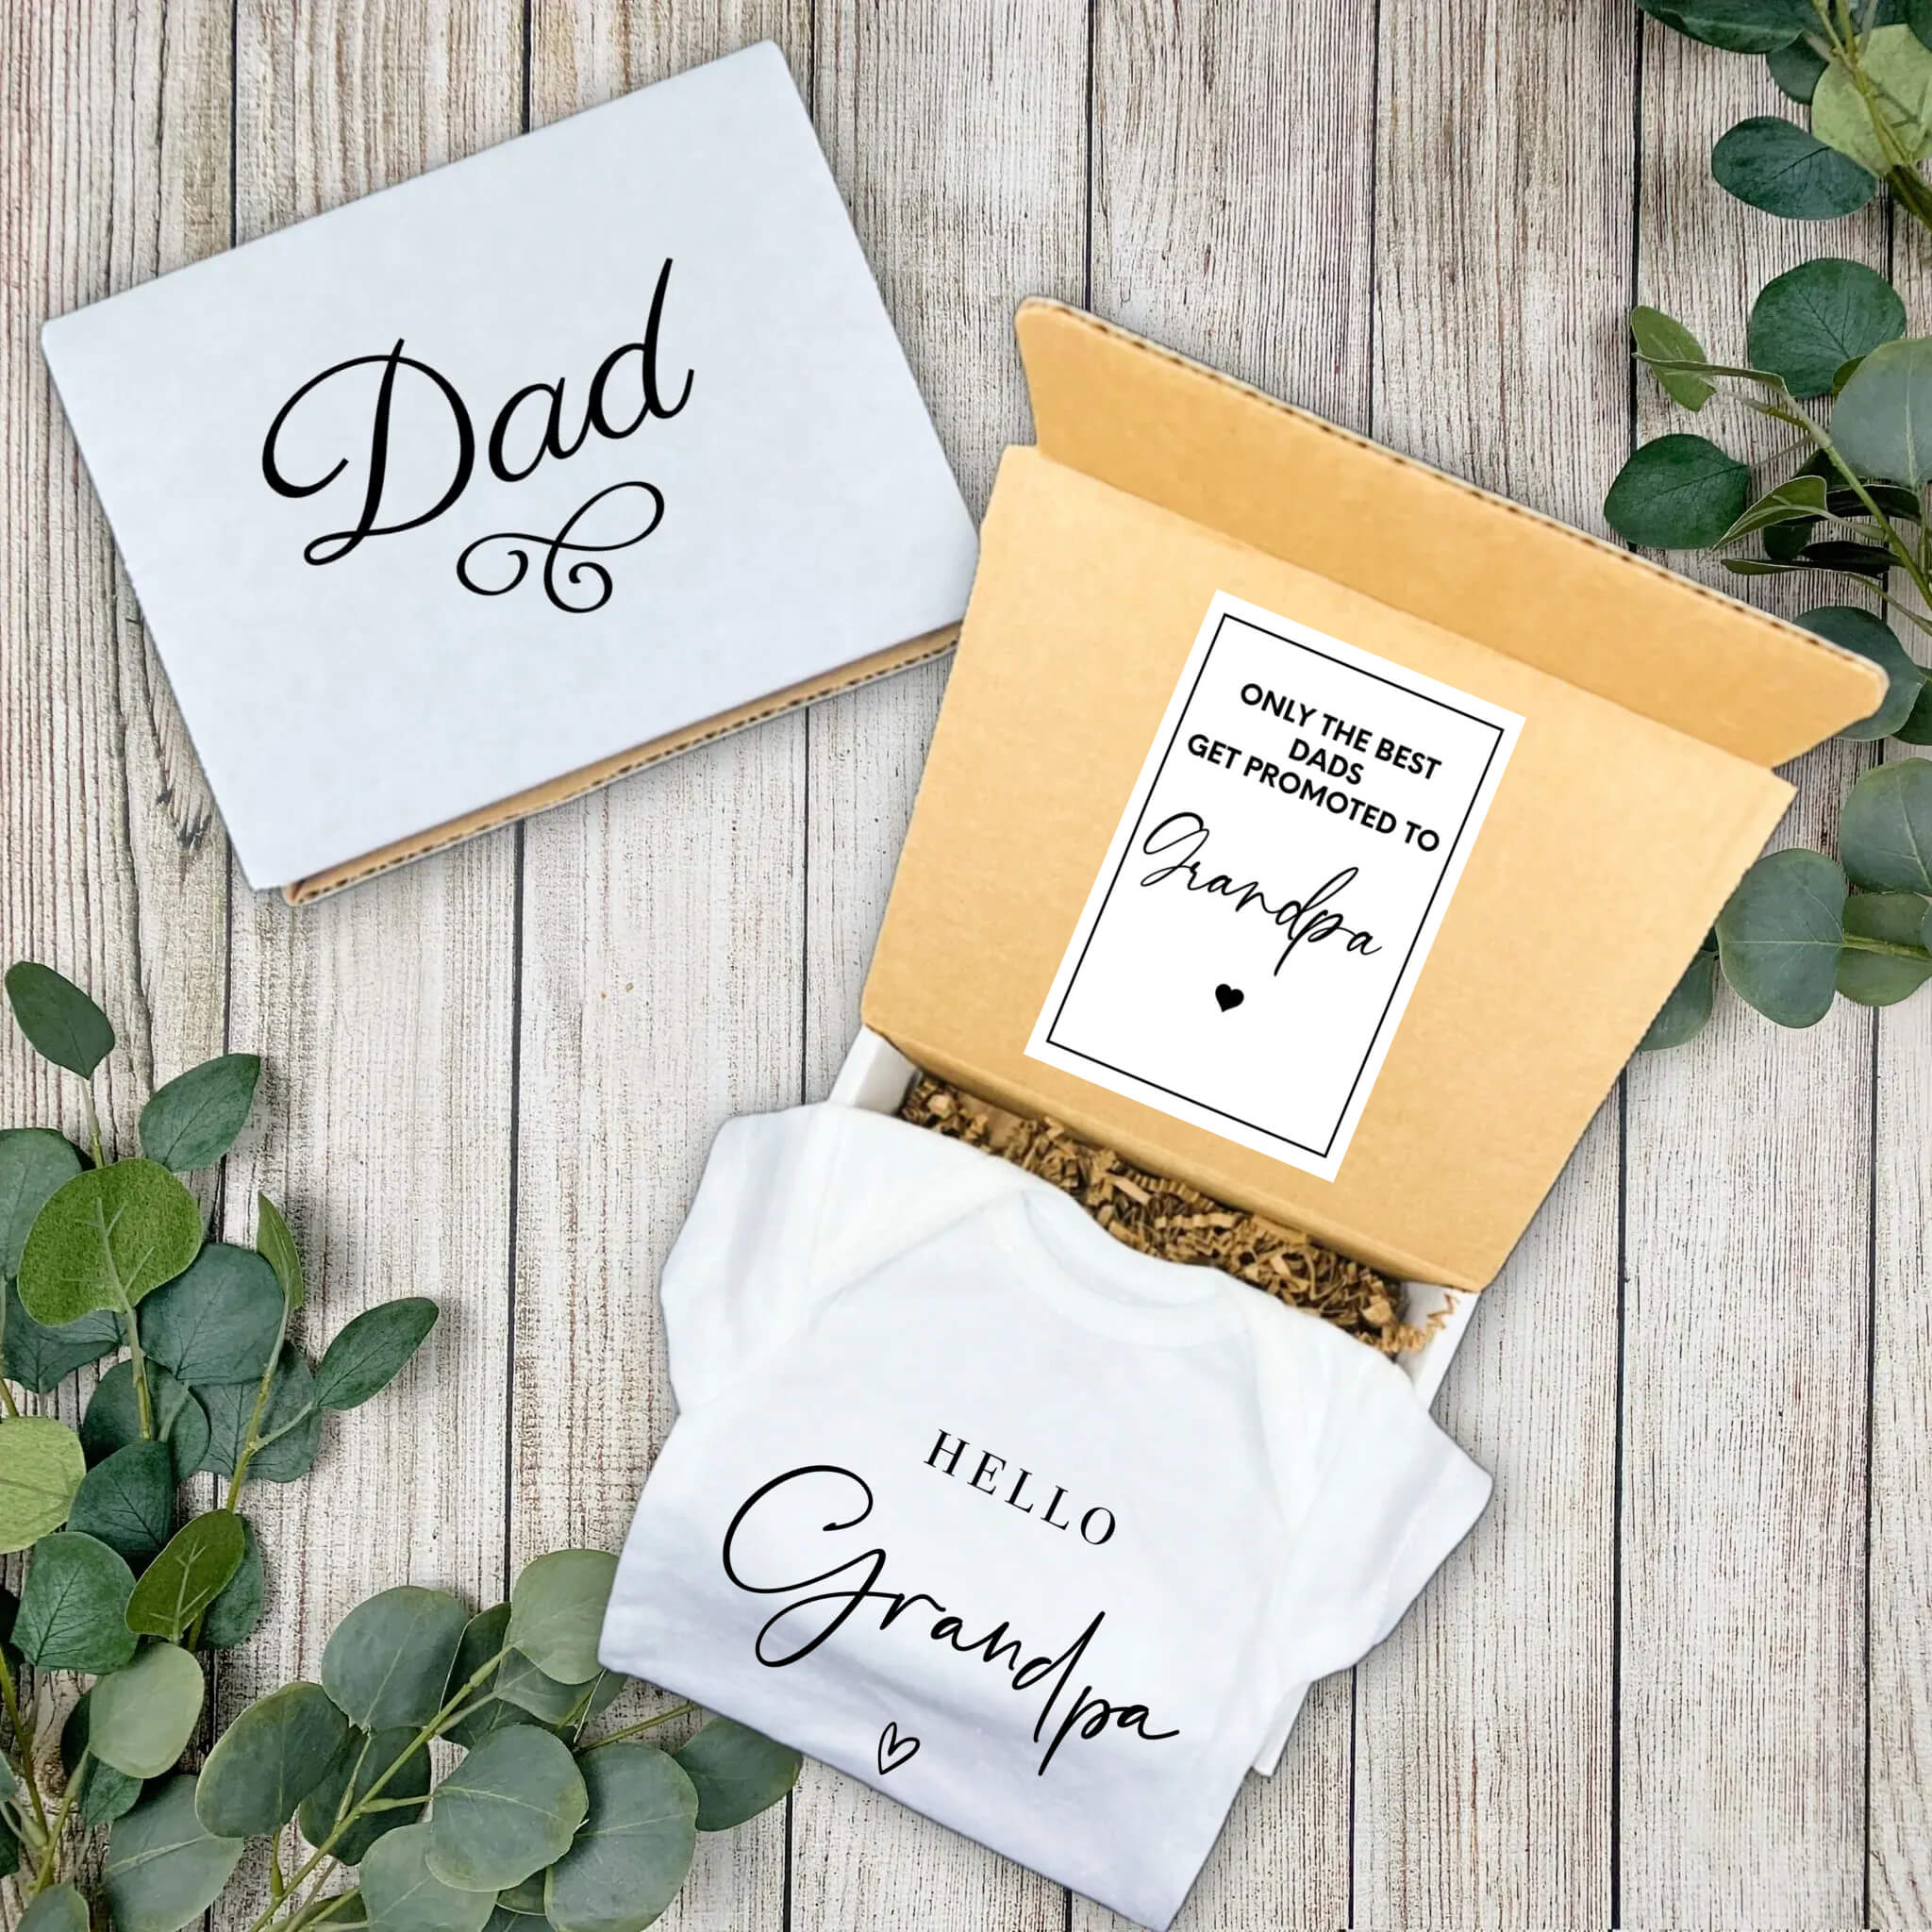 Personalized Pregnancy Announcement, Hello Grandpa To Be, Papa, Pops, Gpa, Customized Baby Announcement Onesie, Personalized Pregnancy Announcement Gift Box, Personalized Baby Announcement Gift Box